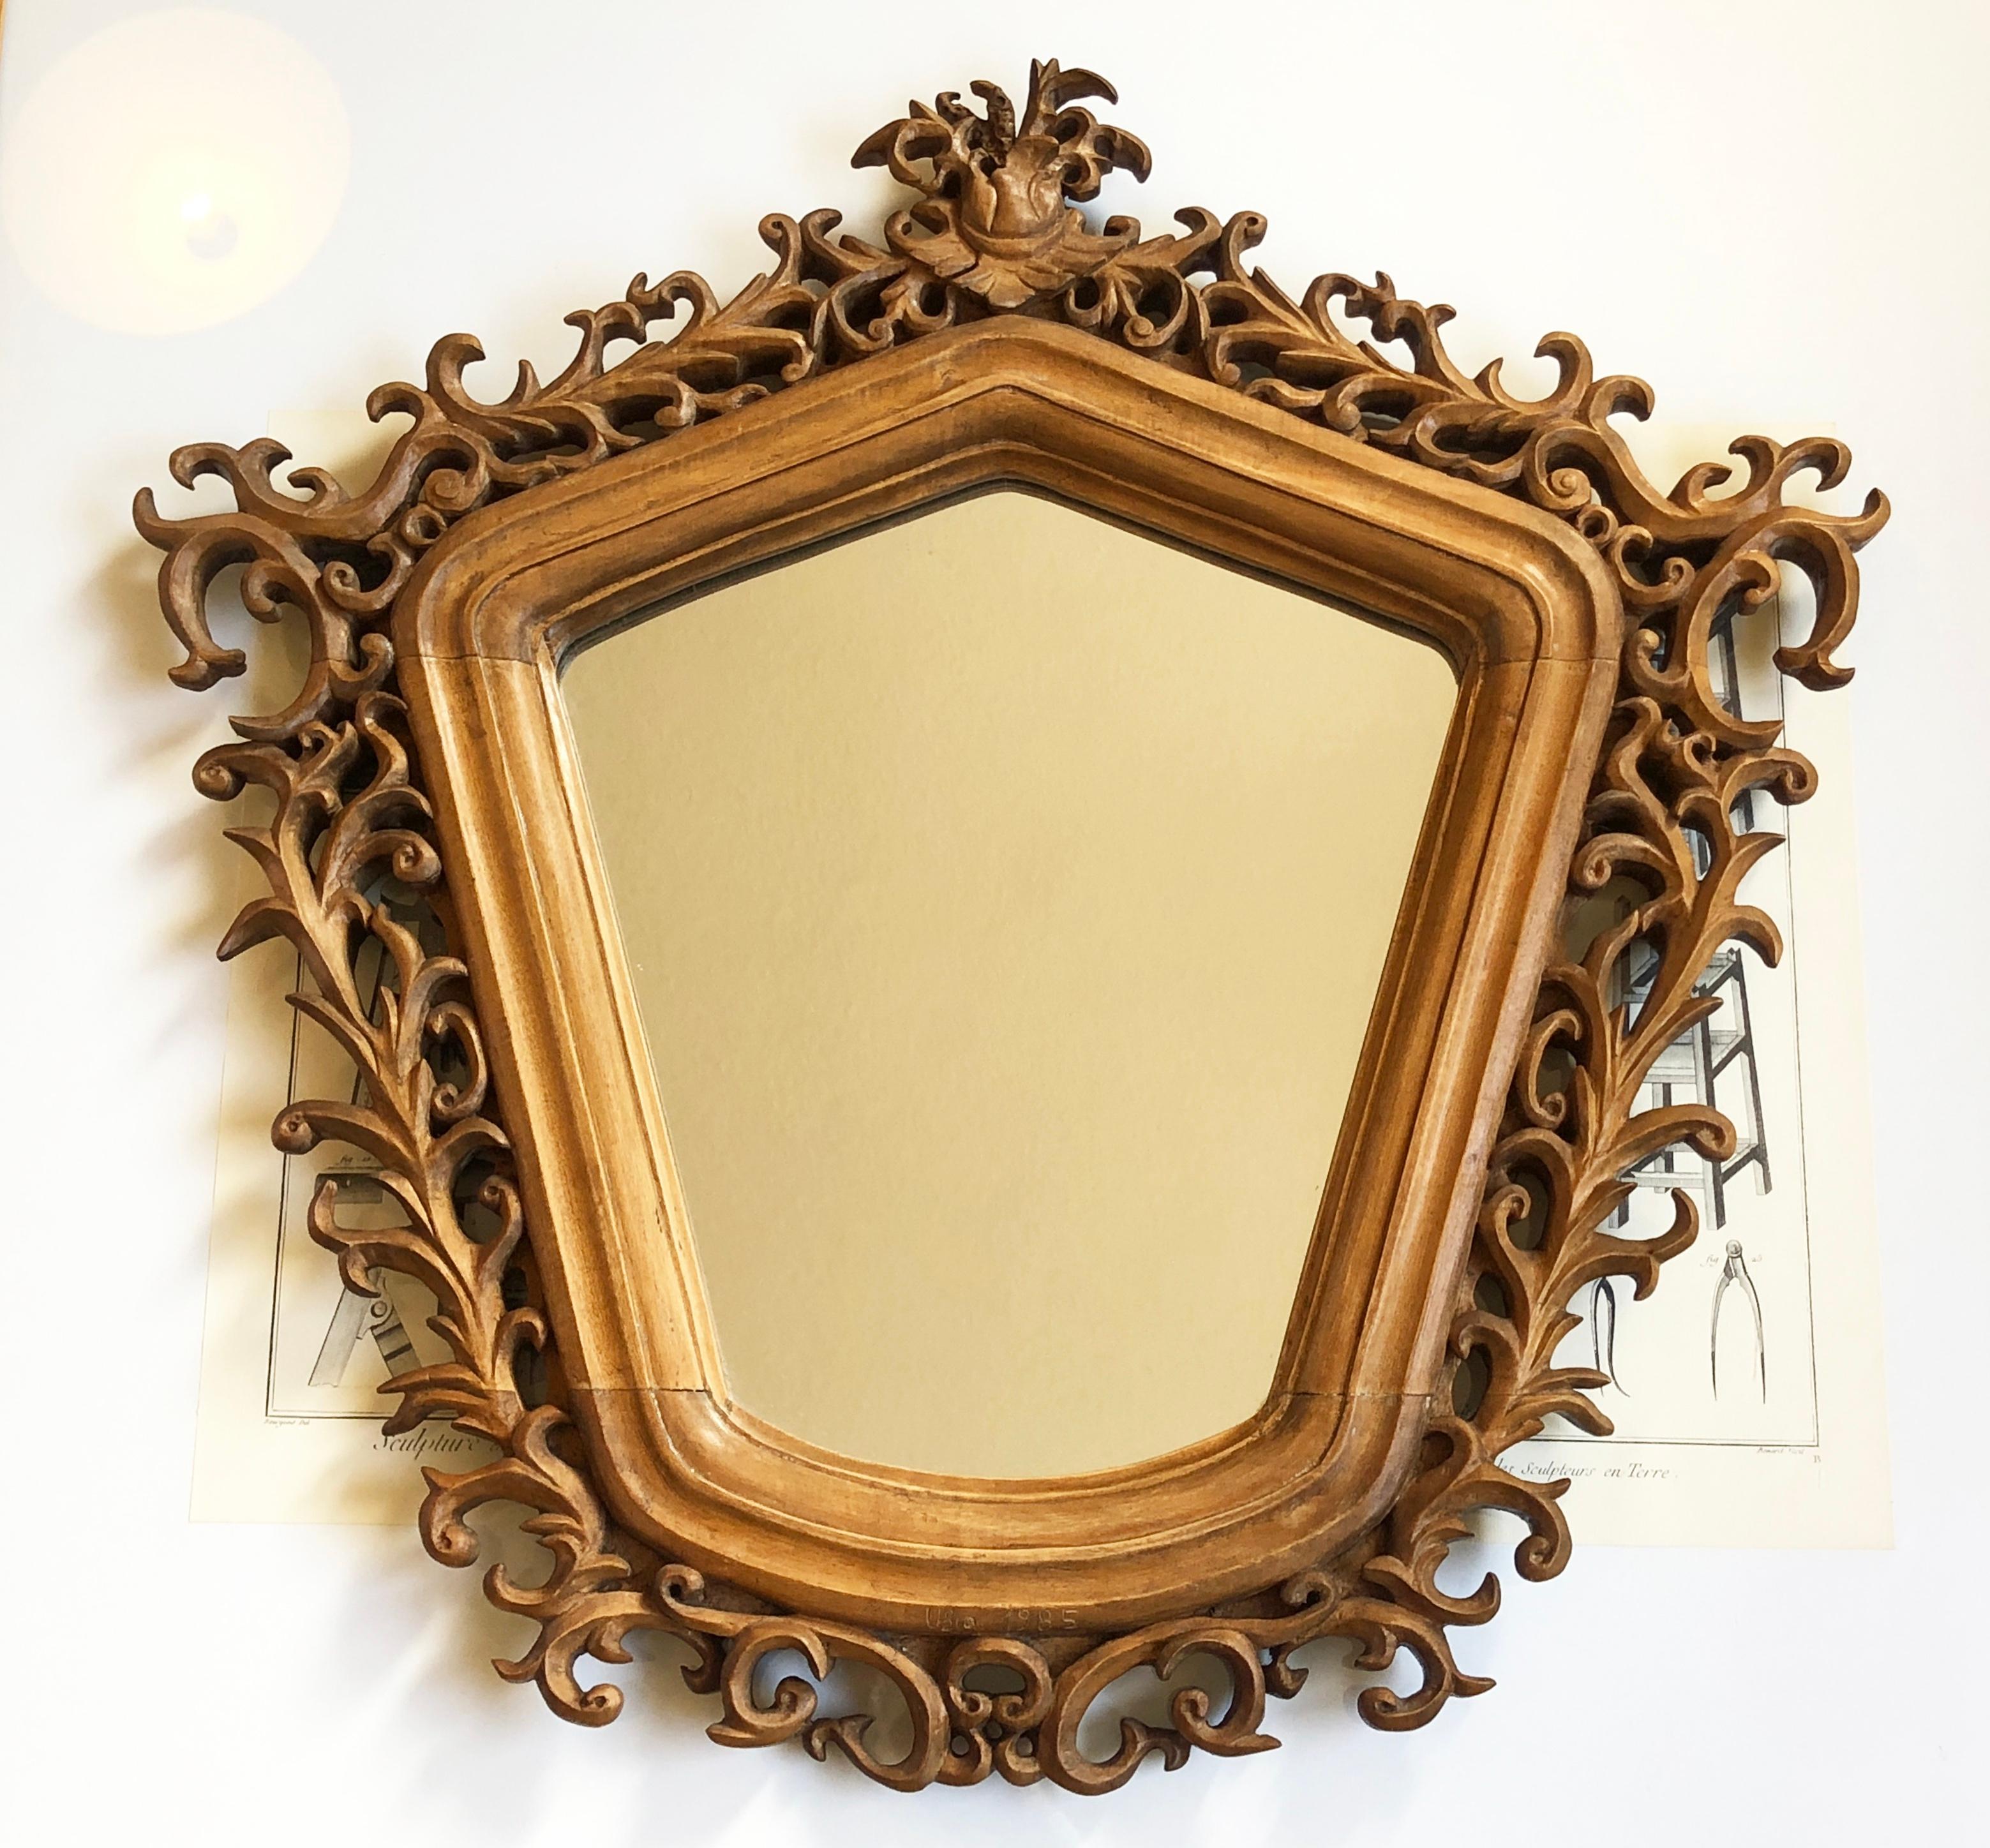 Wonderful rarity: mirror in a unique shape, handmade most likely in Italy.
Baroque or Rococo style, magnificent carving with slightly chivalrous symbolism at the top. 
Roughly notched year & name below: Ubro (Usro?) 1985. 
This will have been added